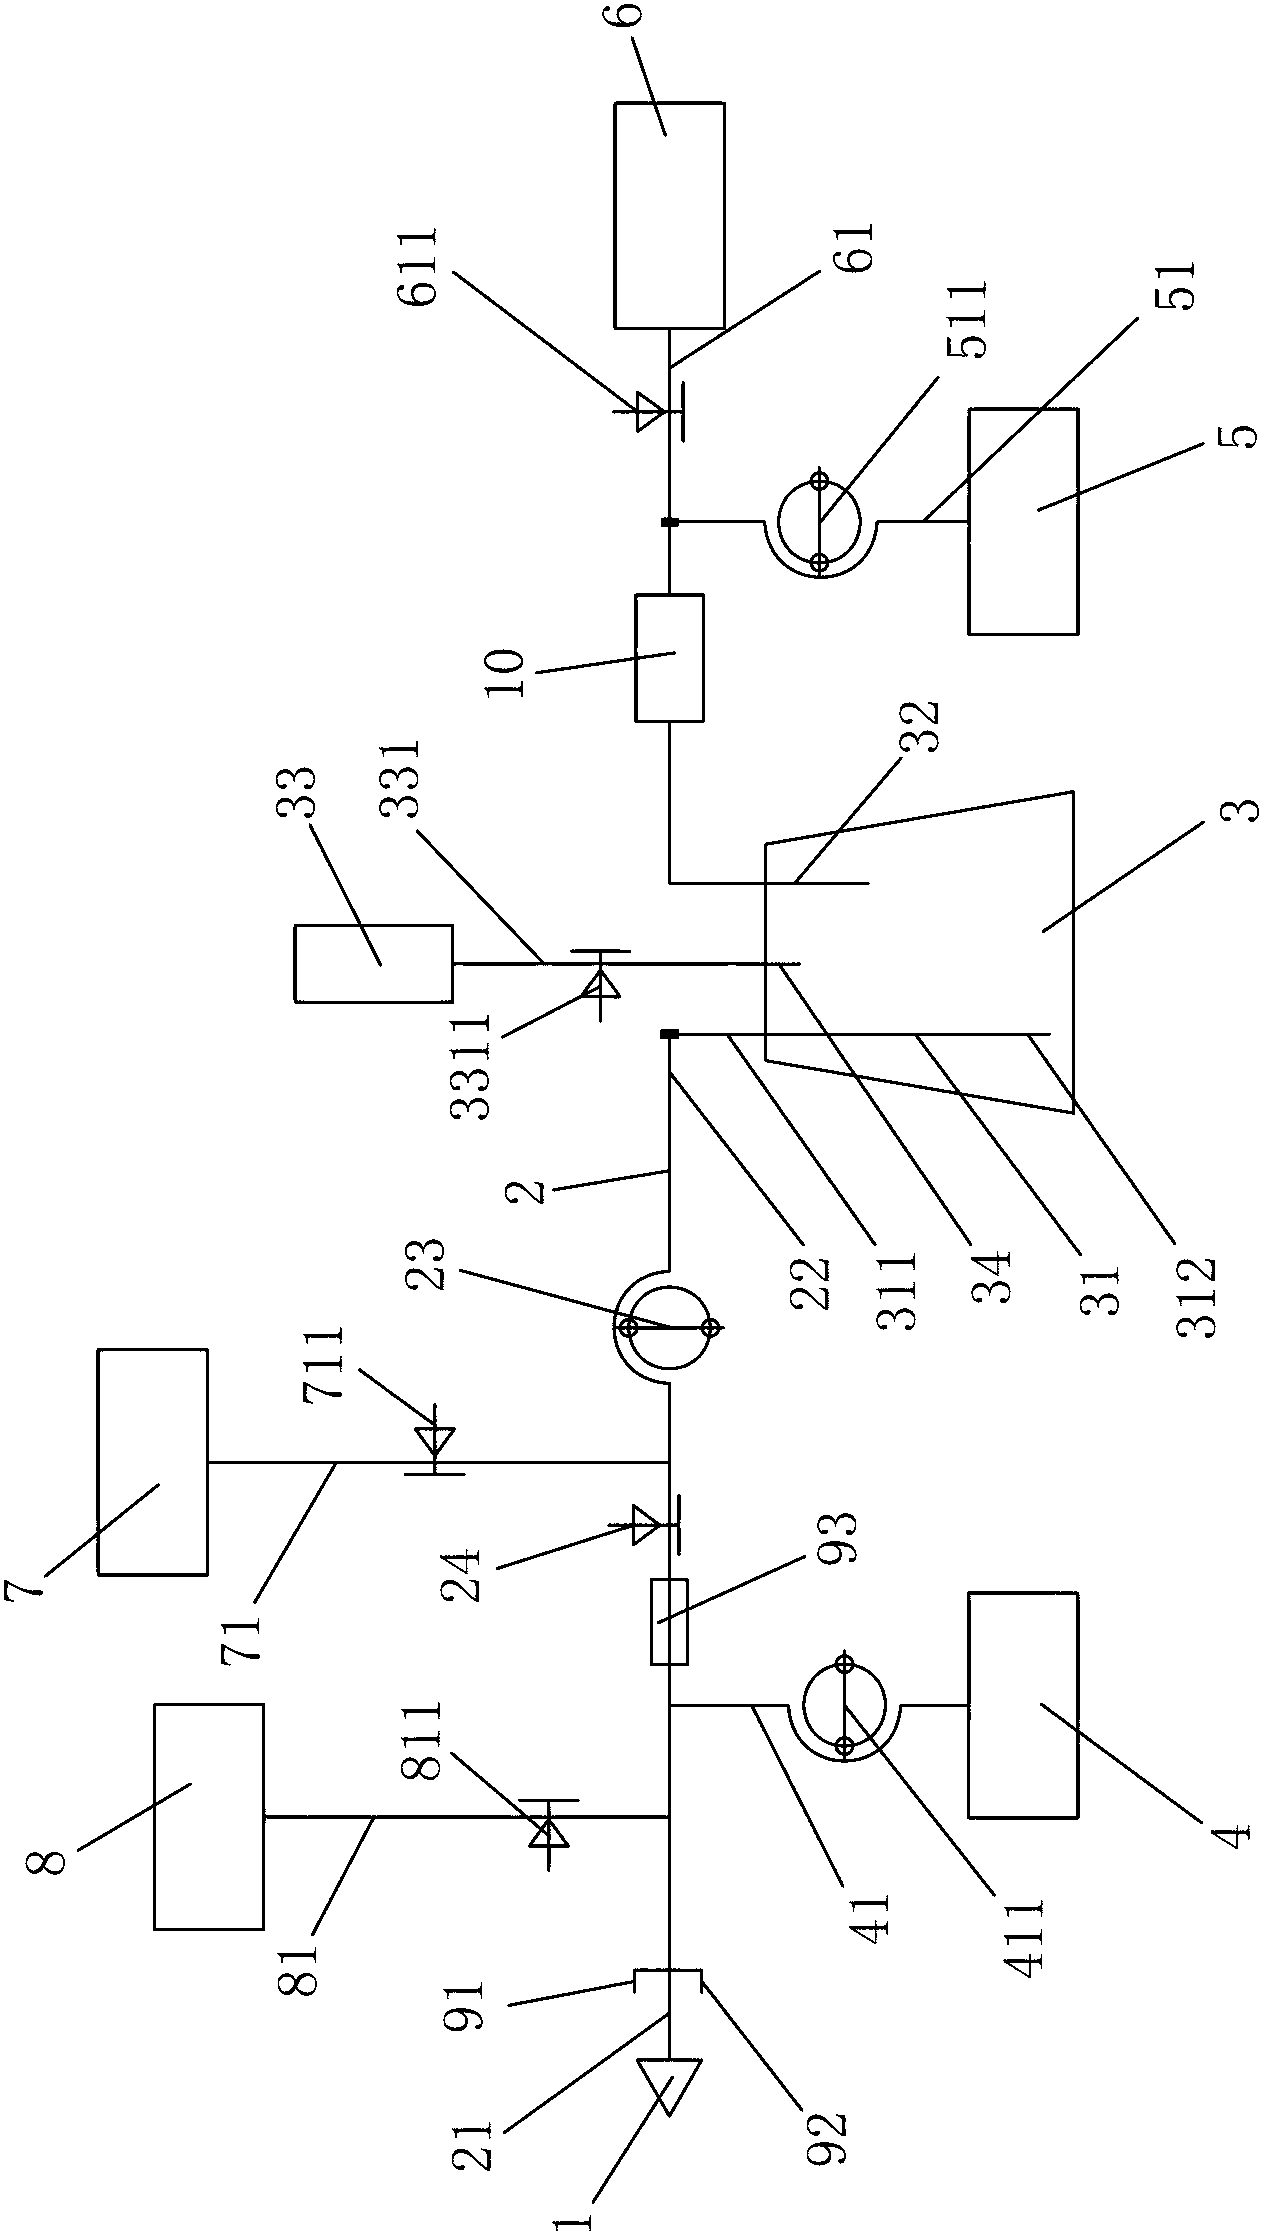 Blood processing system of autologous blood collection and method for processing blood by employing same